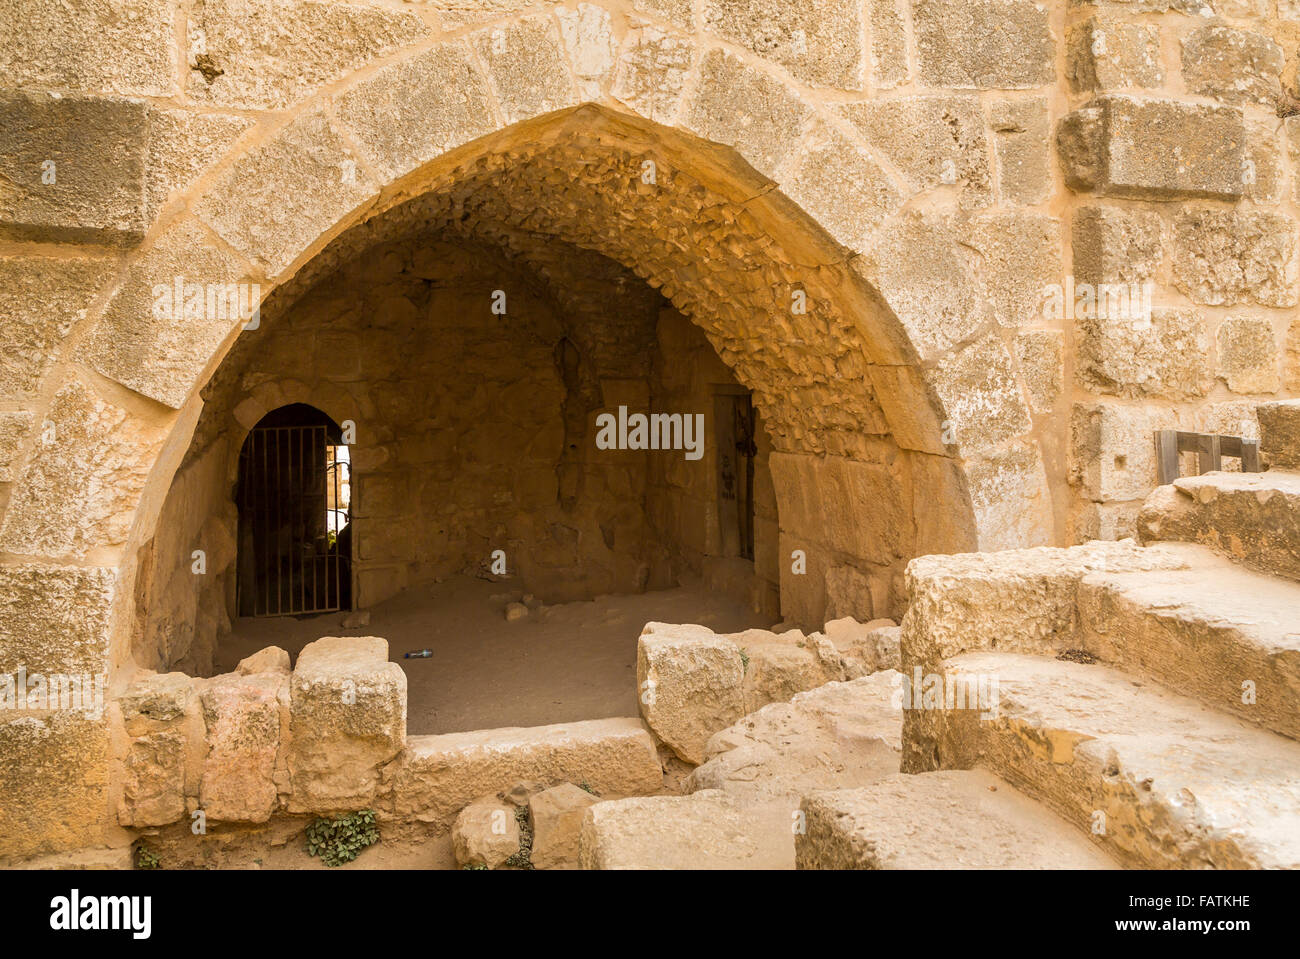 The interior halls of the historic Ajlun Castle in the Hashemite Kingdom of Jordan, Middle East. Stock Photo